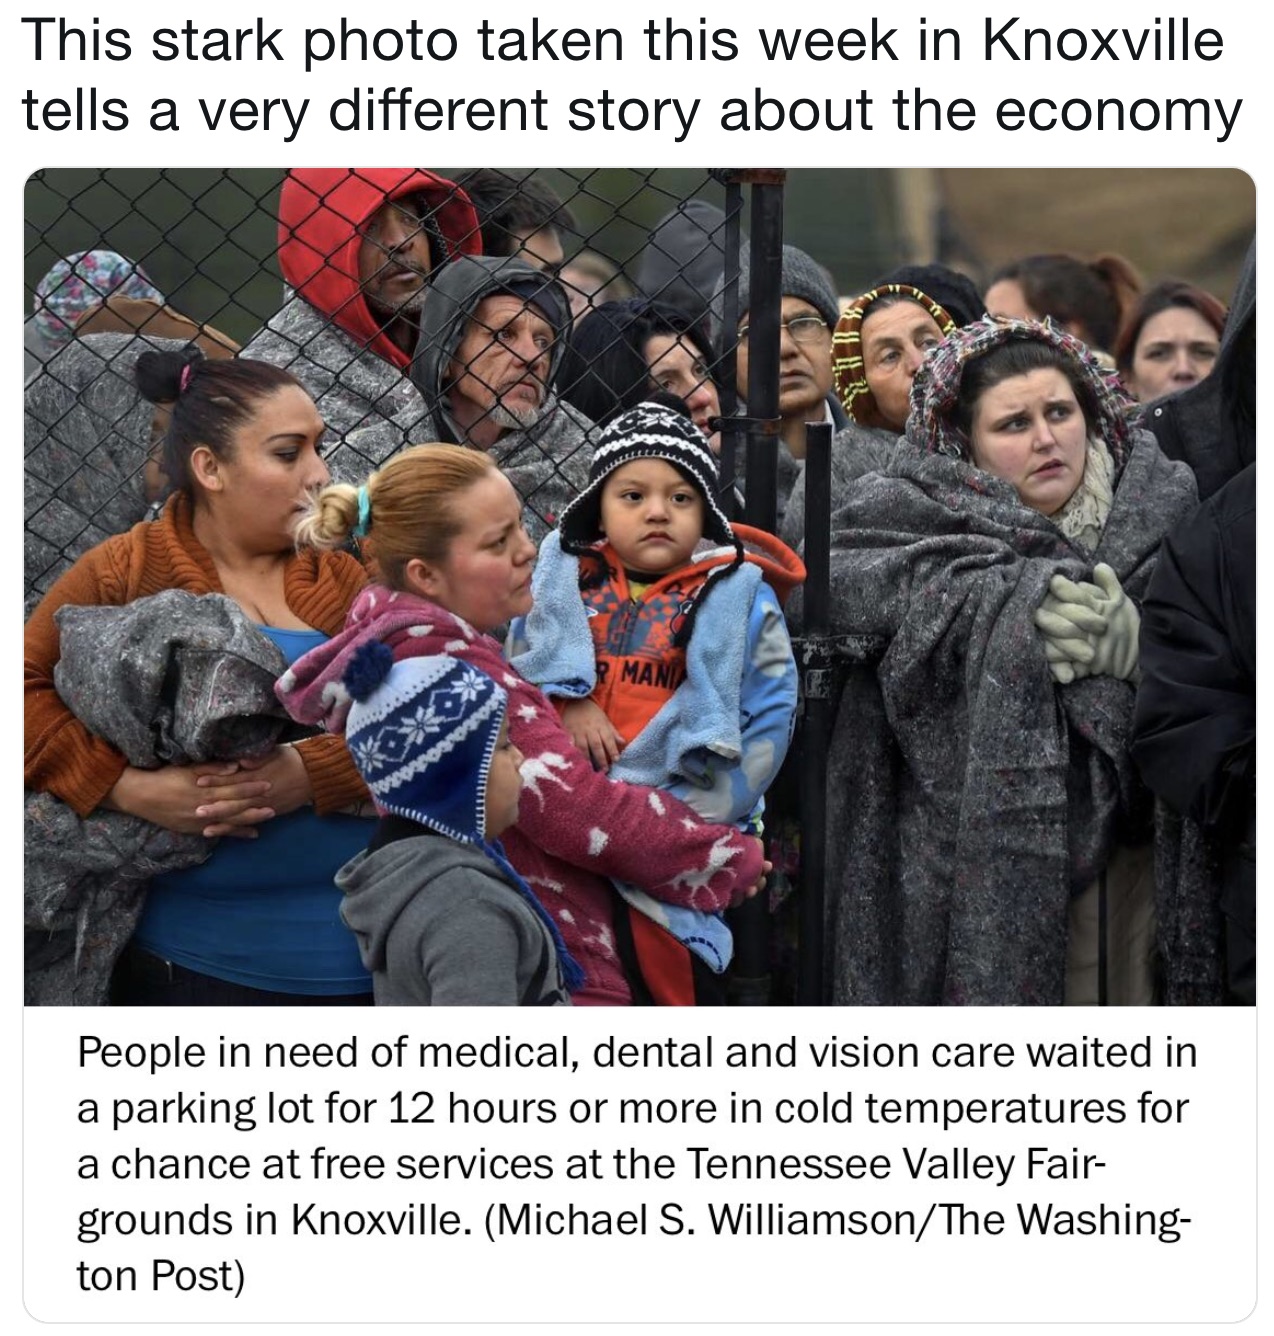 Dafna_Linzer_on_Twitter___This_stark_photo_taken_this_week_in_Knoxville_tells_a_very_different_story_about_the_economy…